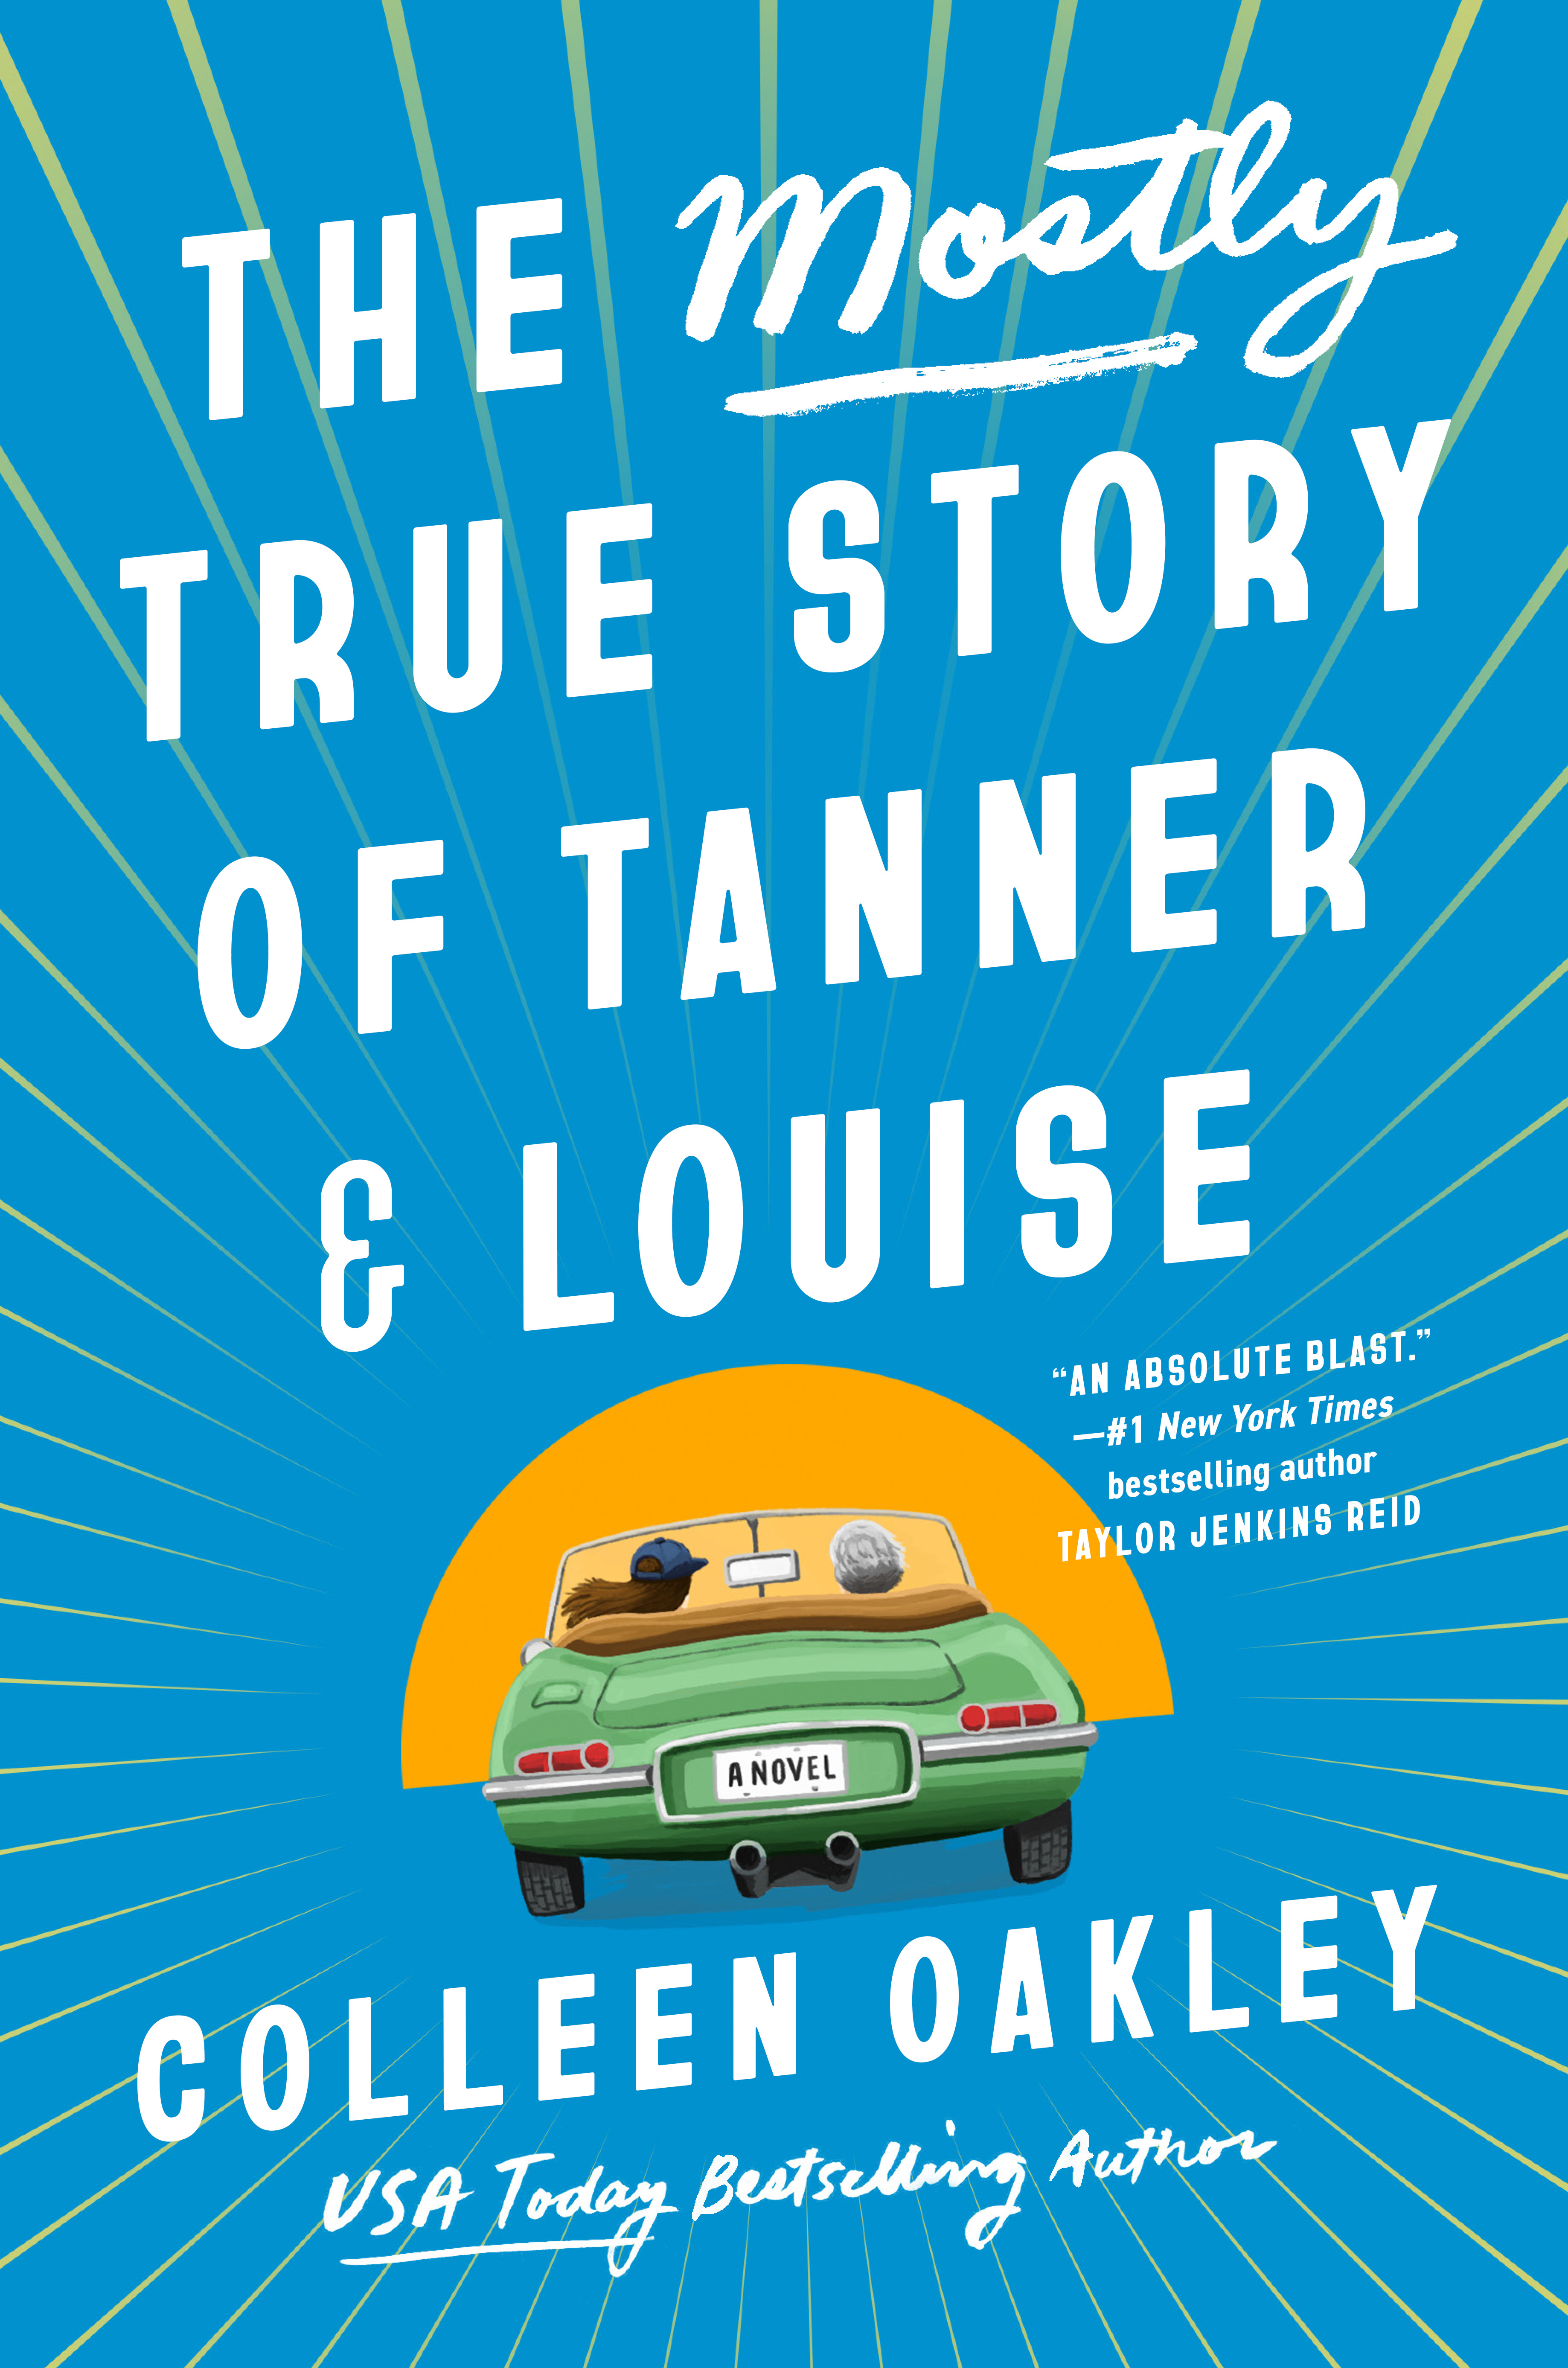 The Mostly True Story of Tanner & Louise PDF Download